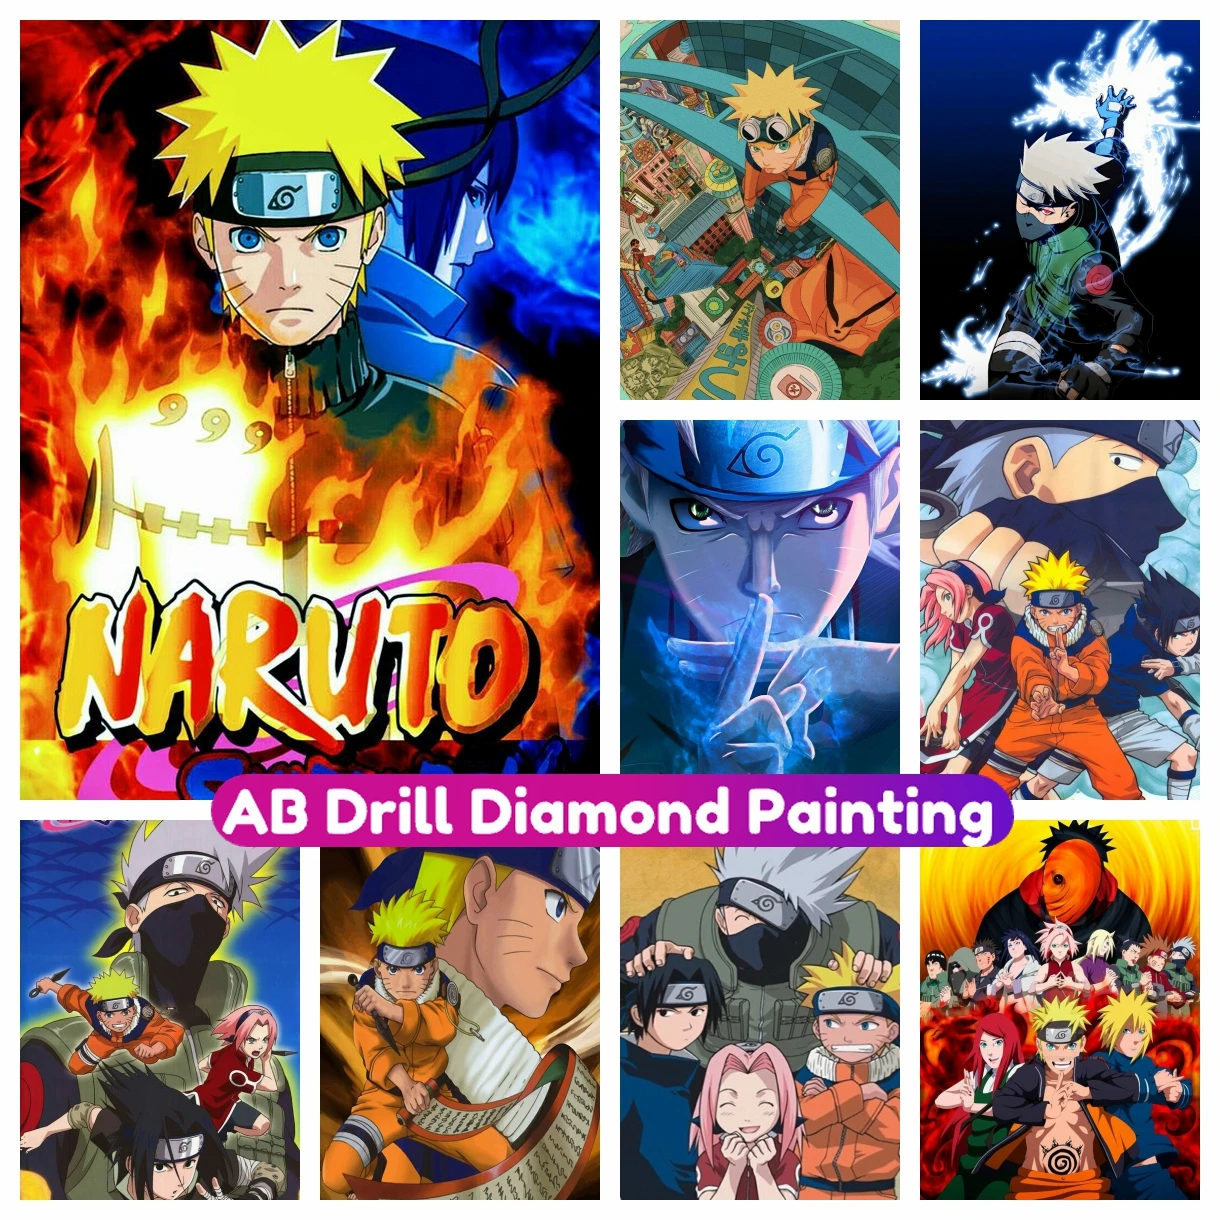 

N-Narutoes Anime AB Diamond Painting Japanese Manga New Arrivals 5D DIY Full Cross Stitch Kit Mosaic Embroidery Home Decor Gift